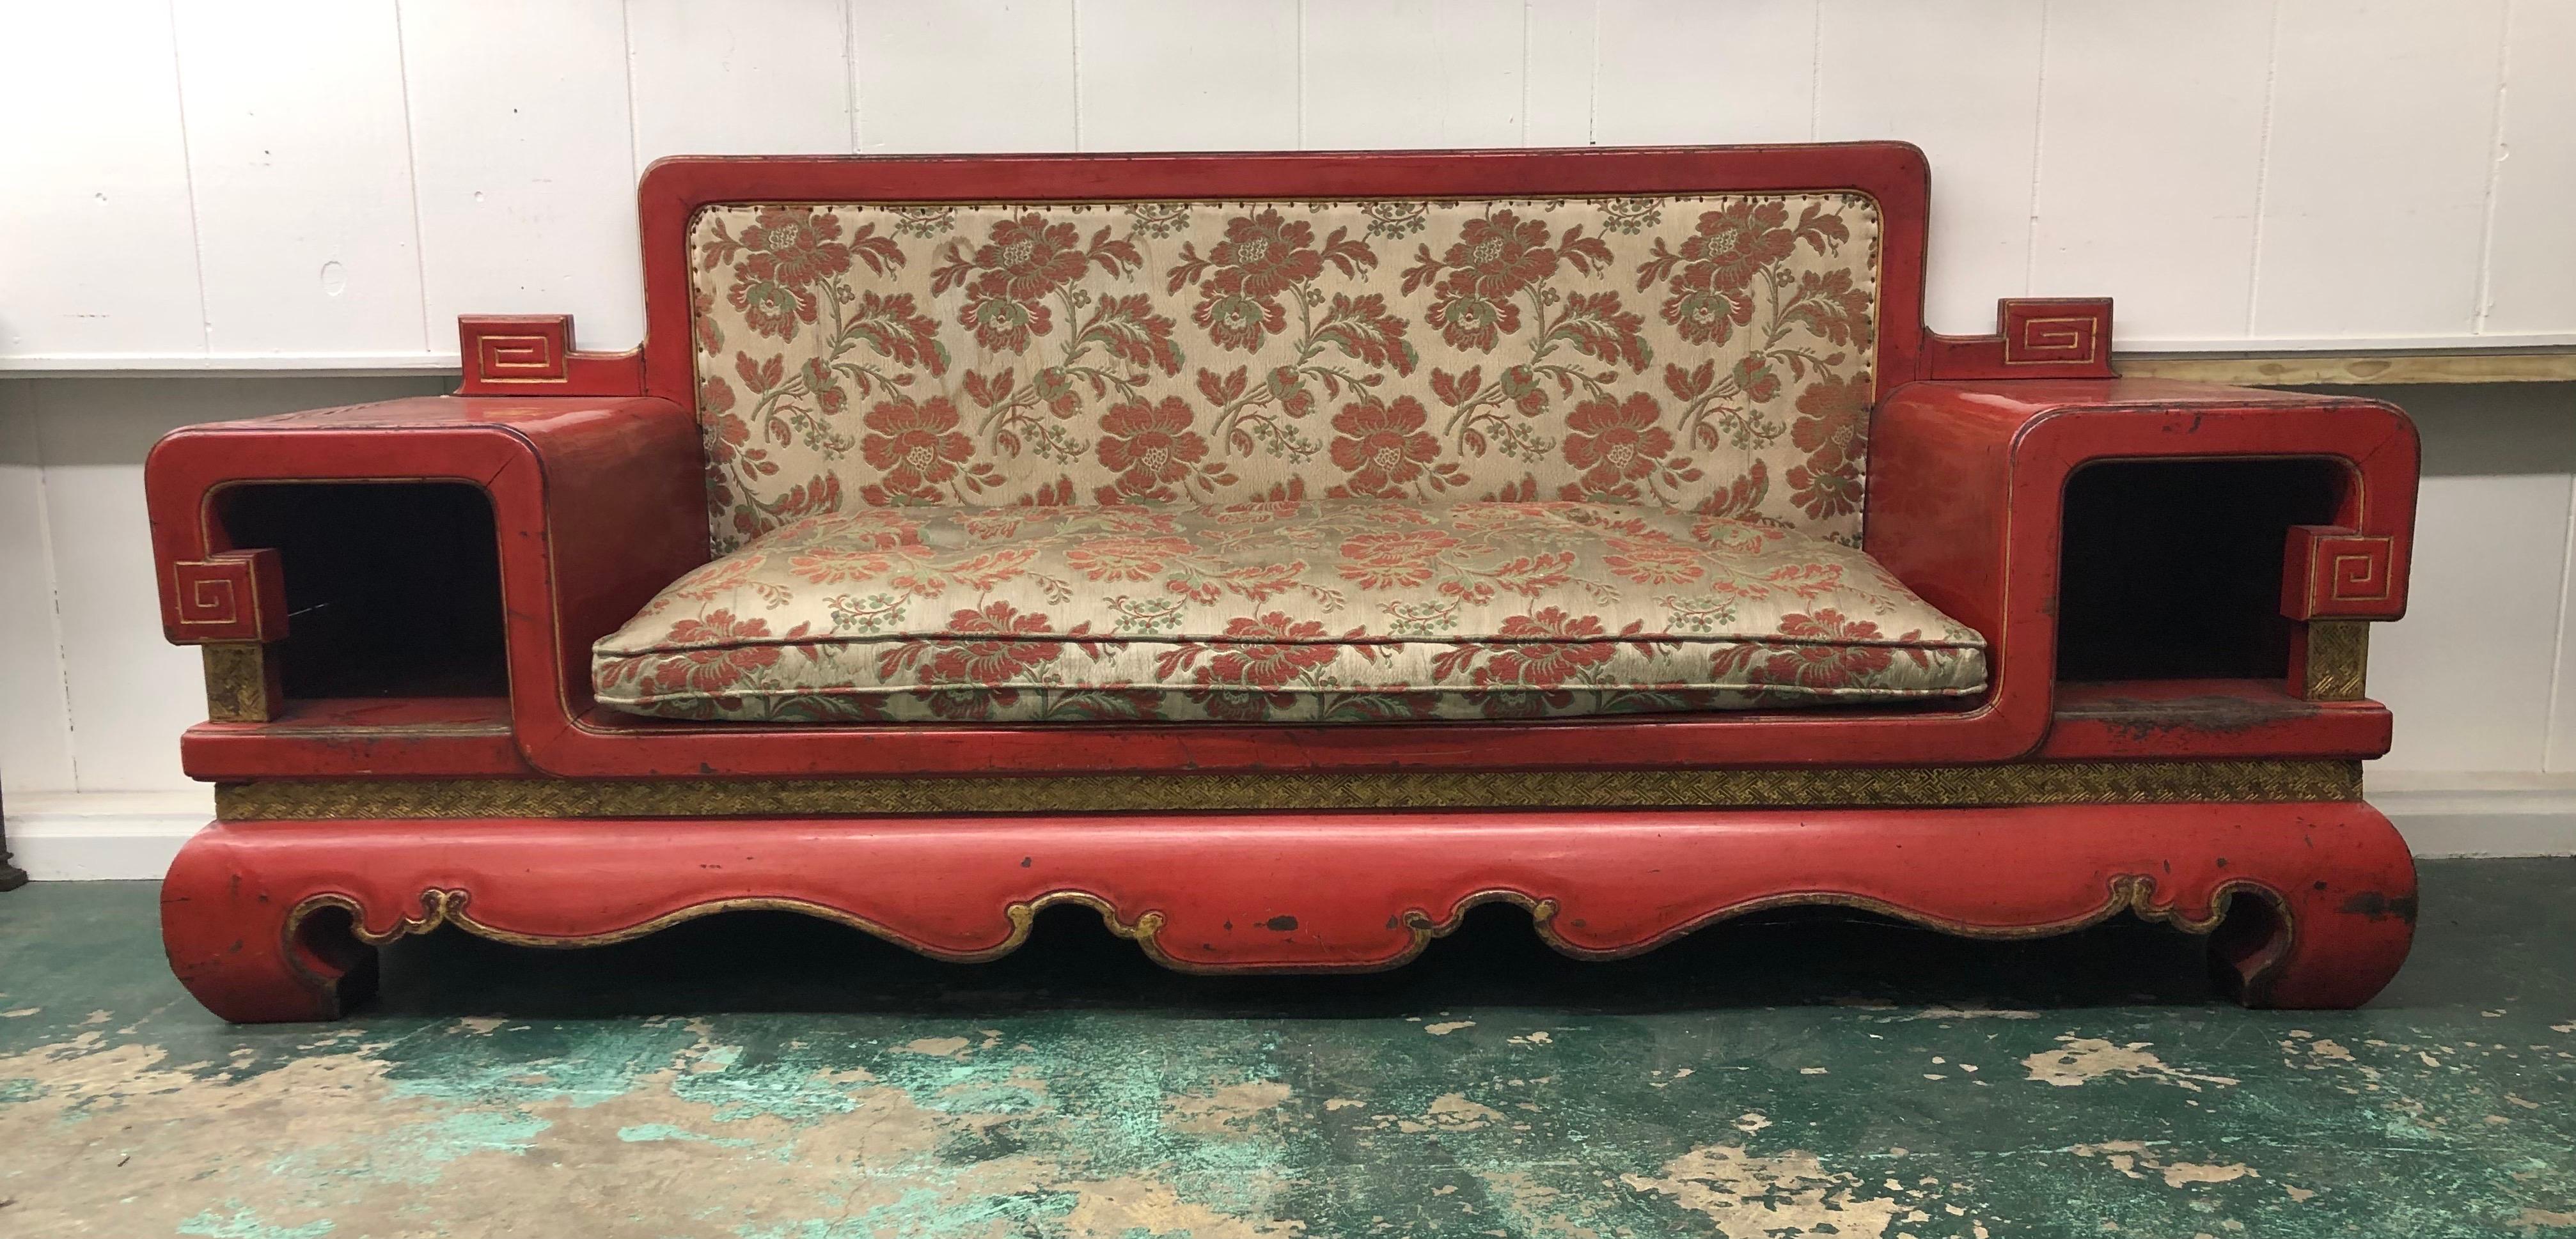 Chinese Qing Dynasty Aesthetic Movement Imperial Red Lacquer Sofa / Bench, 19th Century For Sale